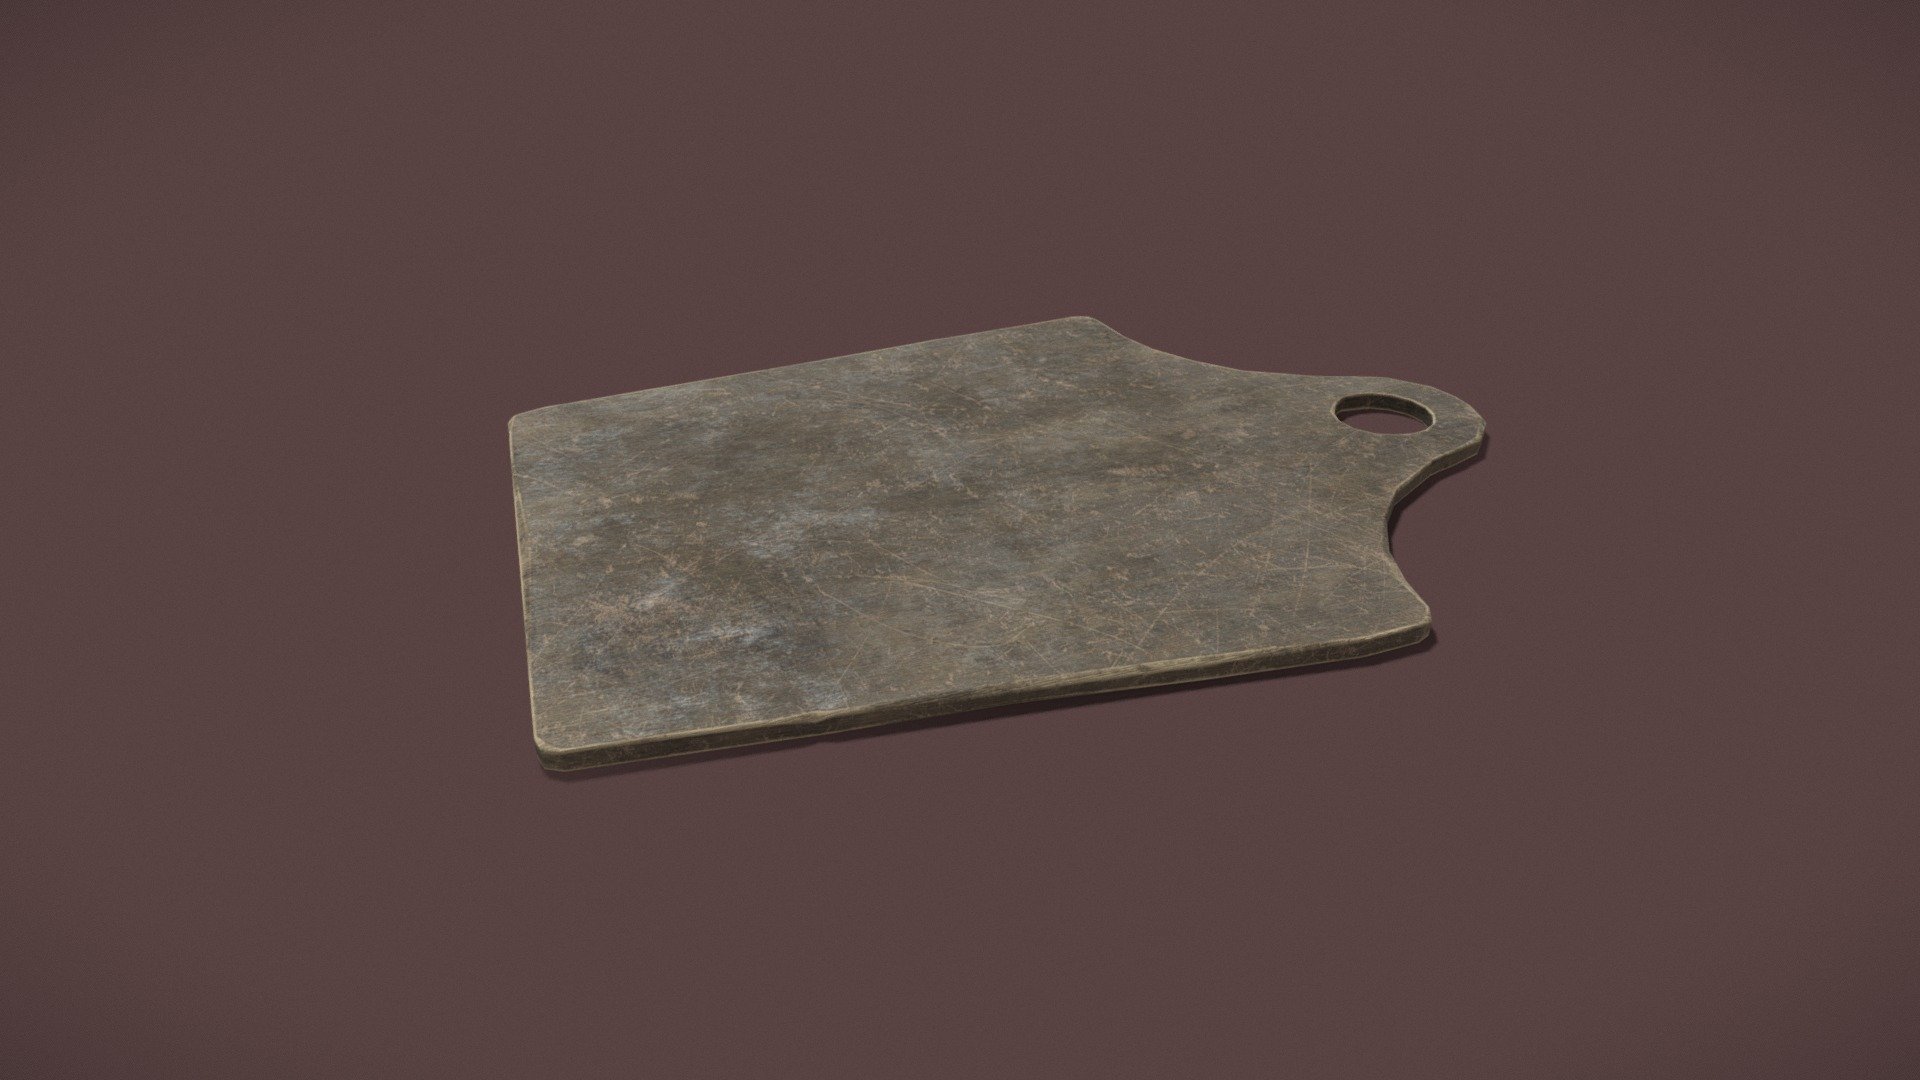 Old_Worn_Wide_Cutting_Board_OBJ
VR / AR / Low-poly
PBR approved
Geometry Polygon mesh
Polygons 723
Vertices 700
Textures PNG 4K - Old_Worn_Wide_Cutting_Board - Buy Royalty Free 3D model by GetDeadEntertainment 3d model